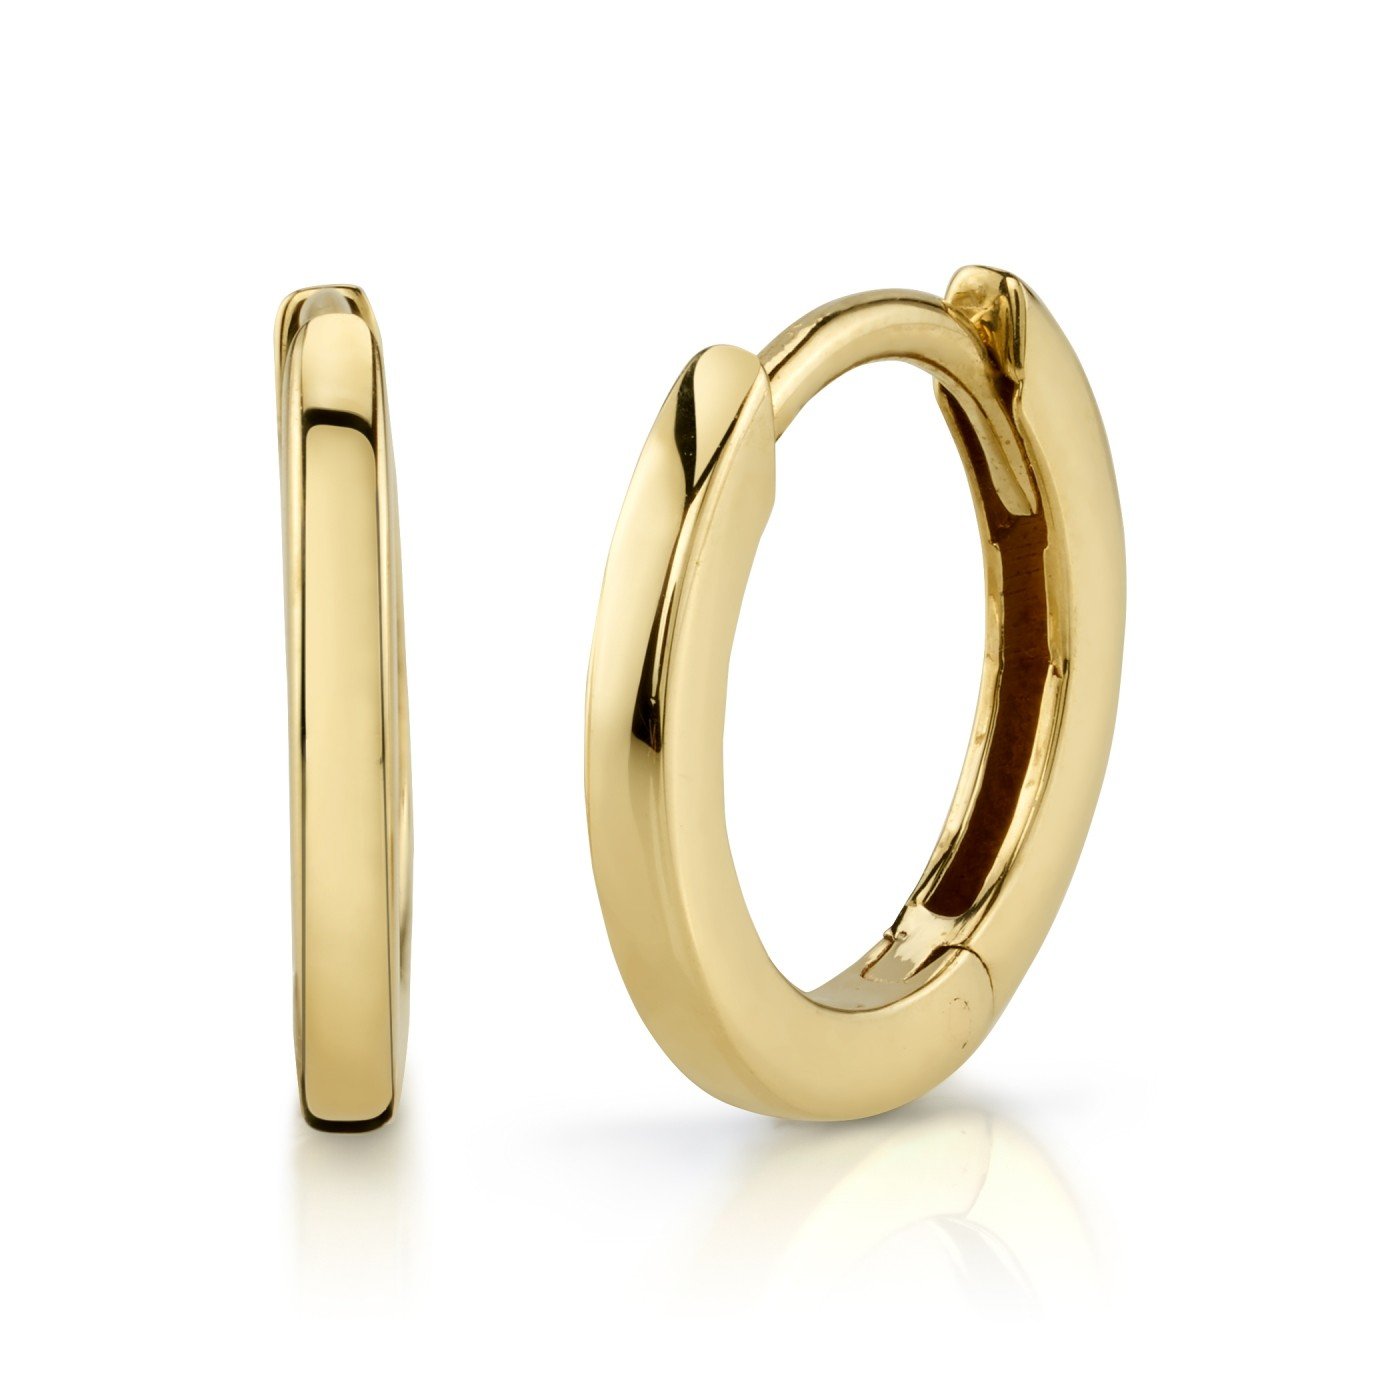 CLASSIC SMALL GOLD HOOPS – Starling